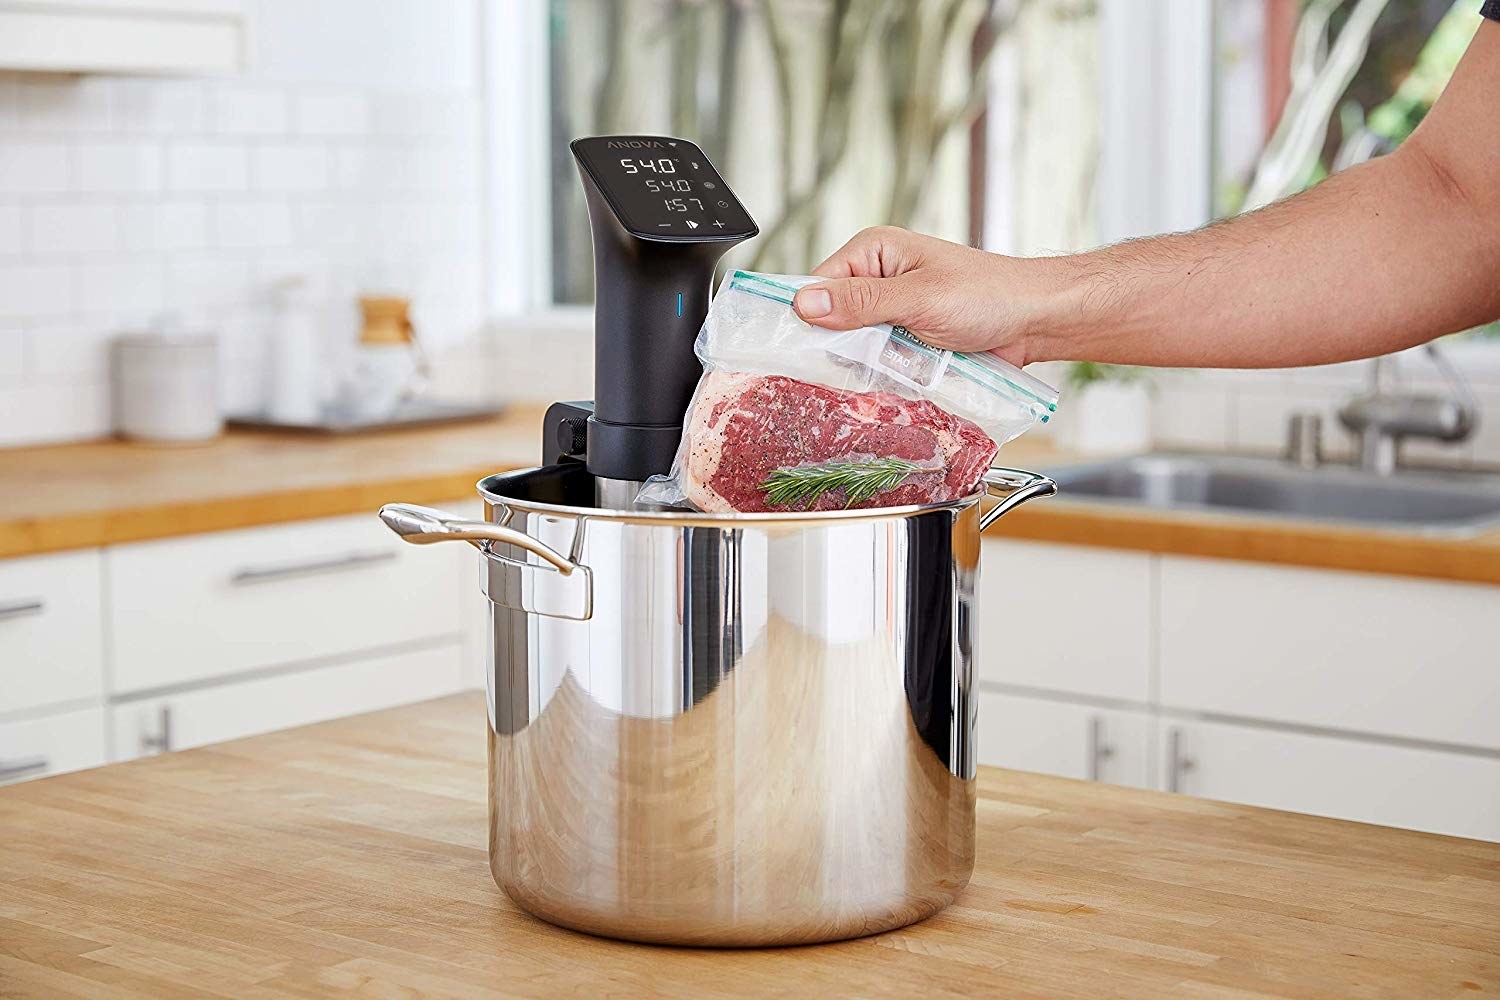 Hand inserted bagged meat into sous vide 